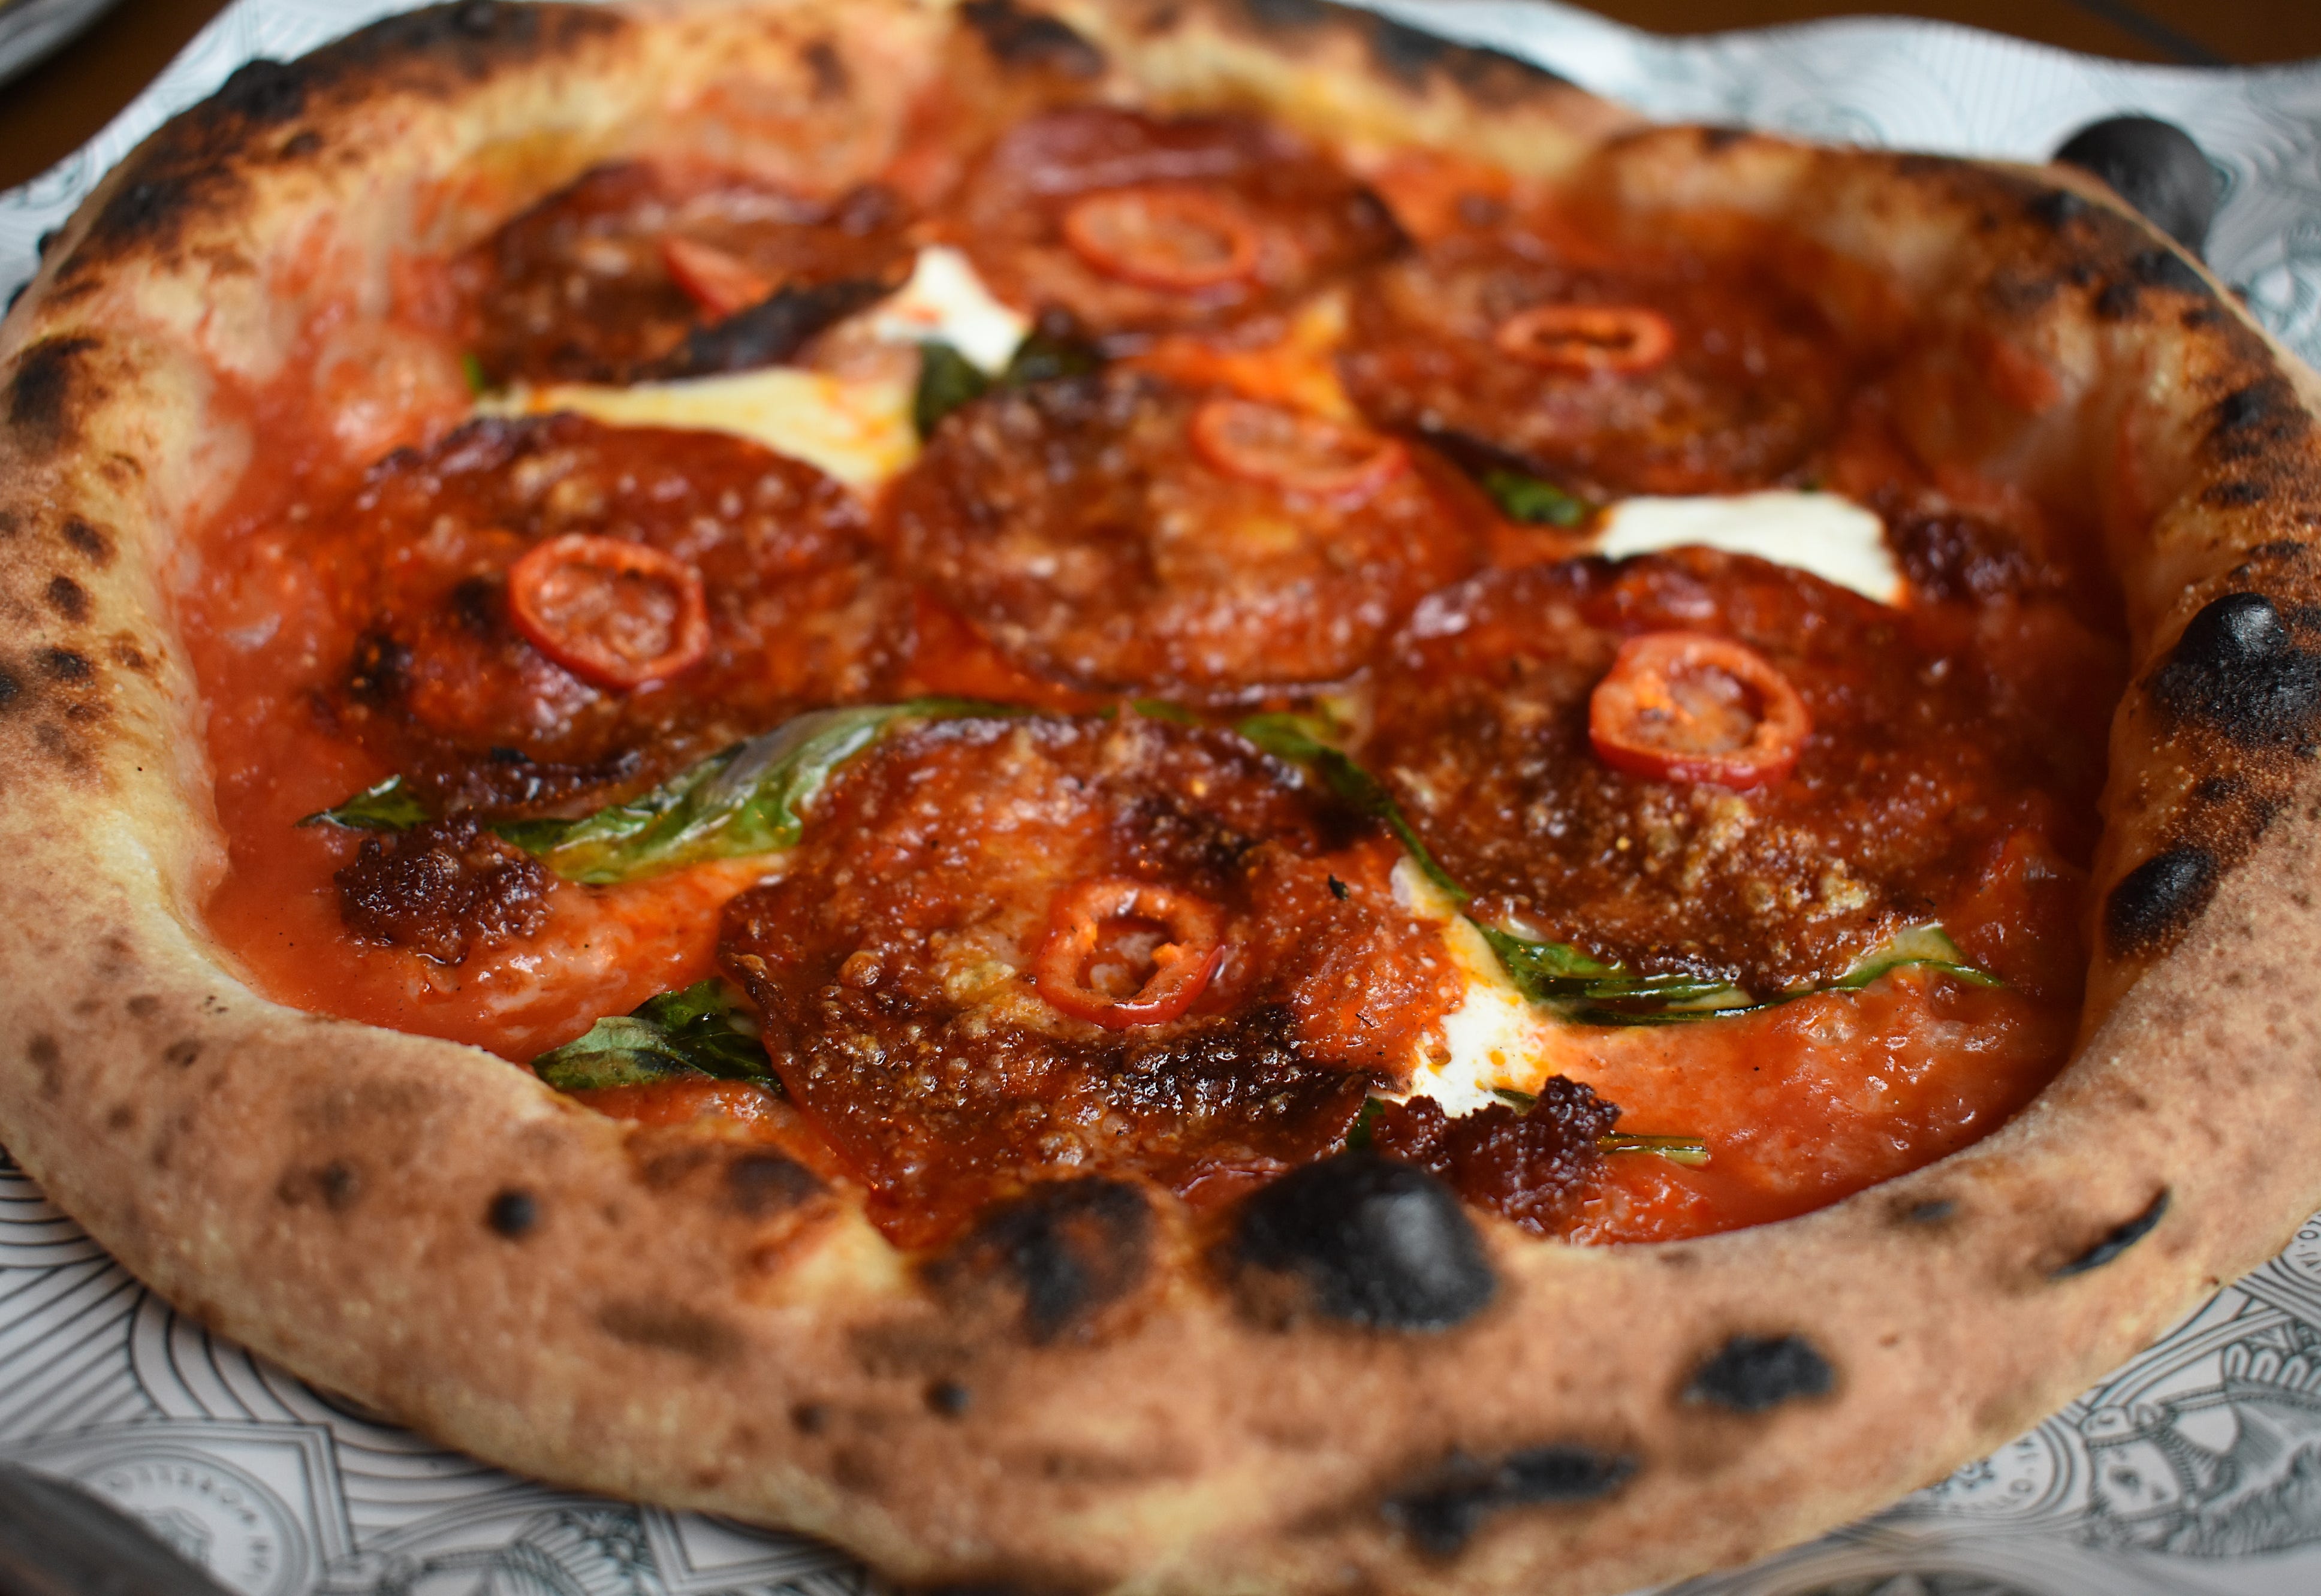 An "OG" pizza, straight outta the wood-fired oven, is topped with pepperoni, 'nduja, and Fresno chilies.